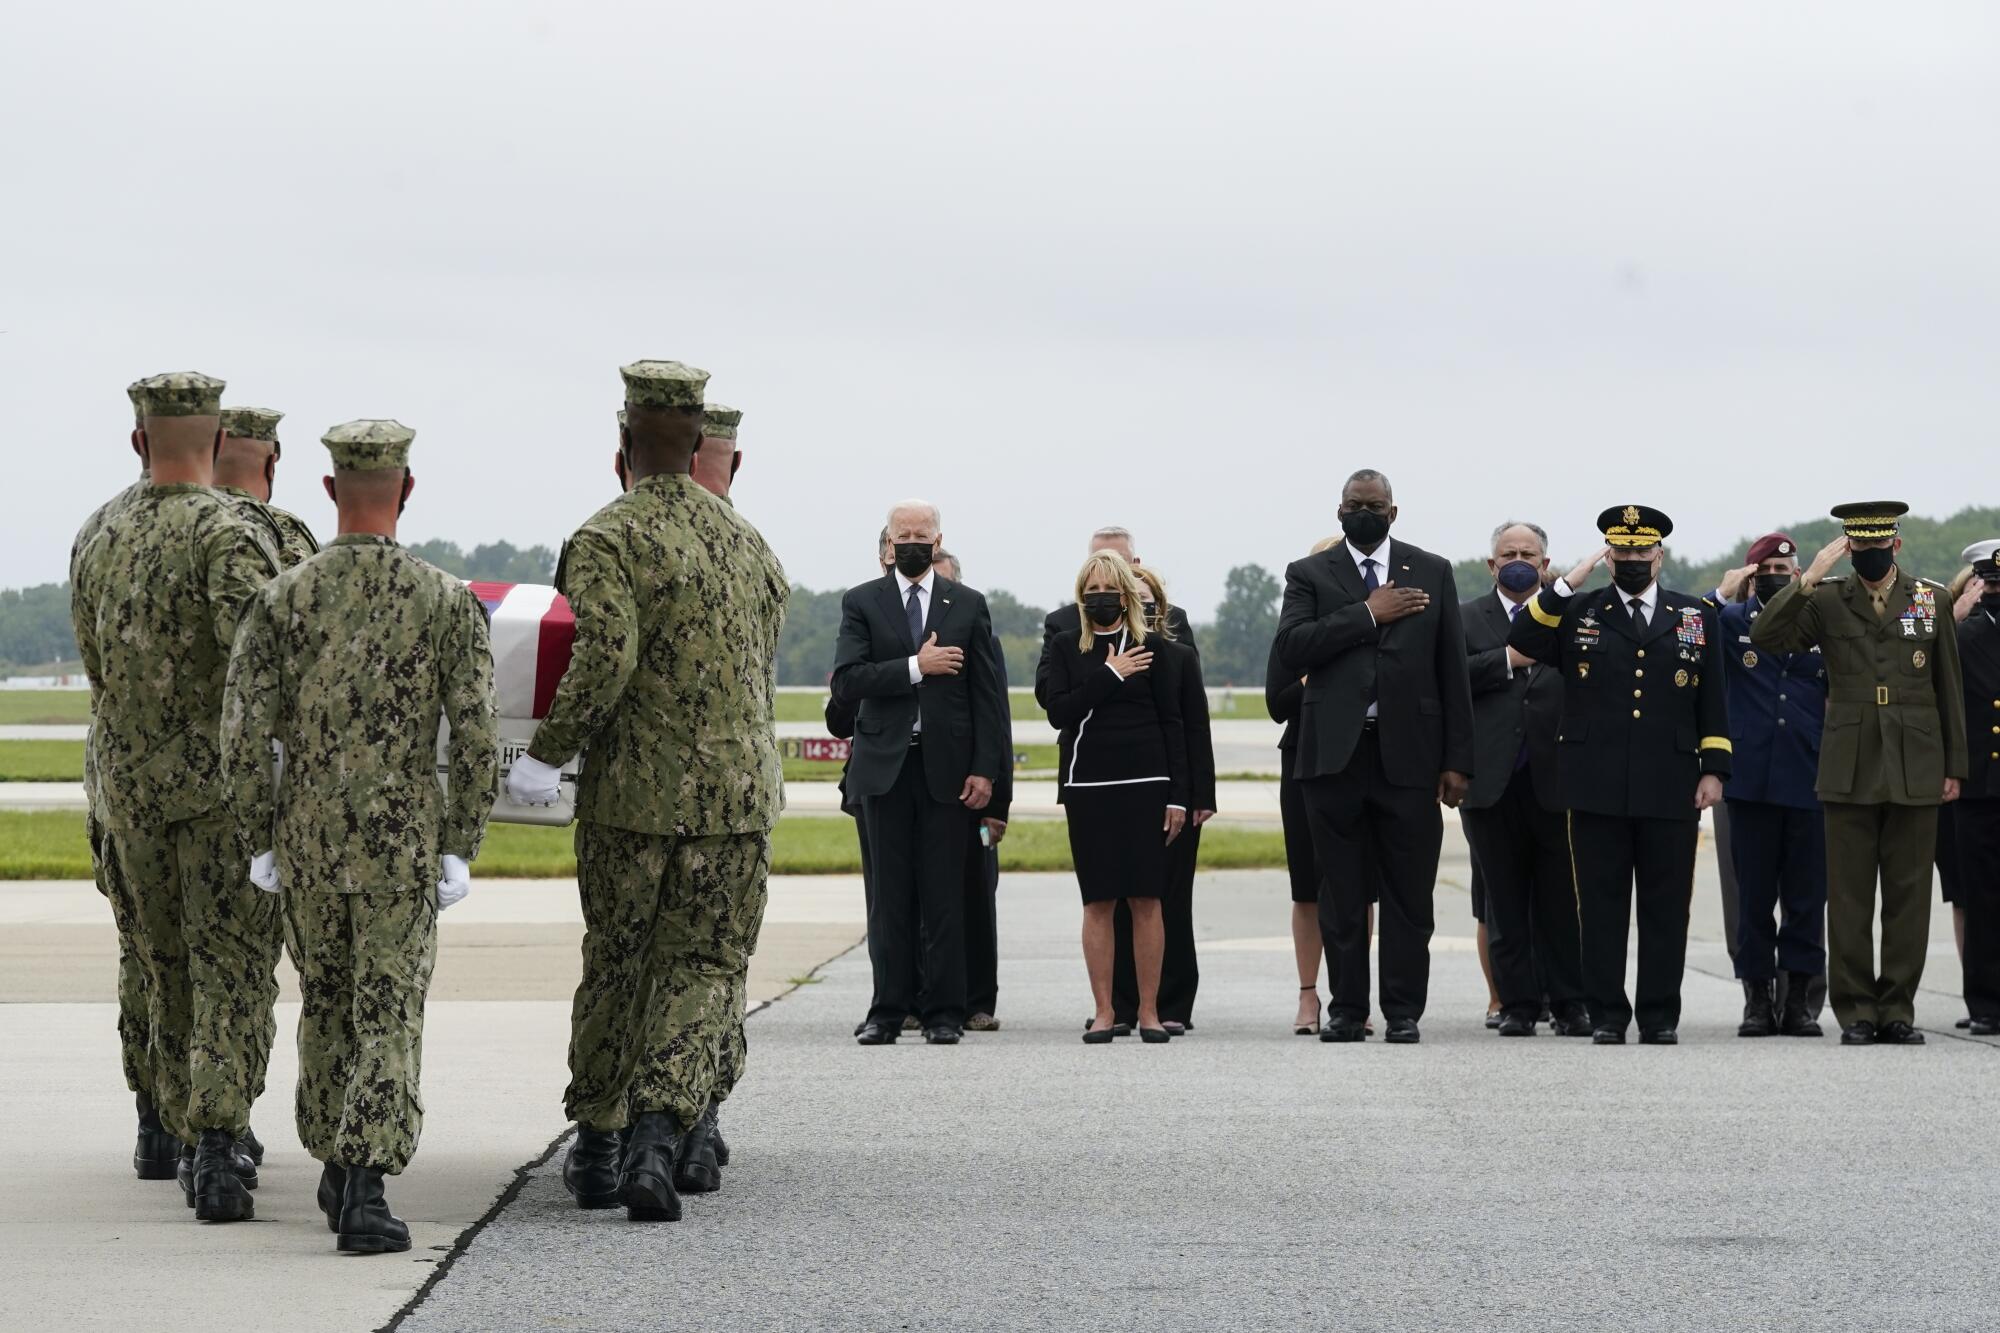 President Biden and others watch as a team carries a fallen service member's remains.